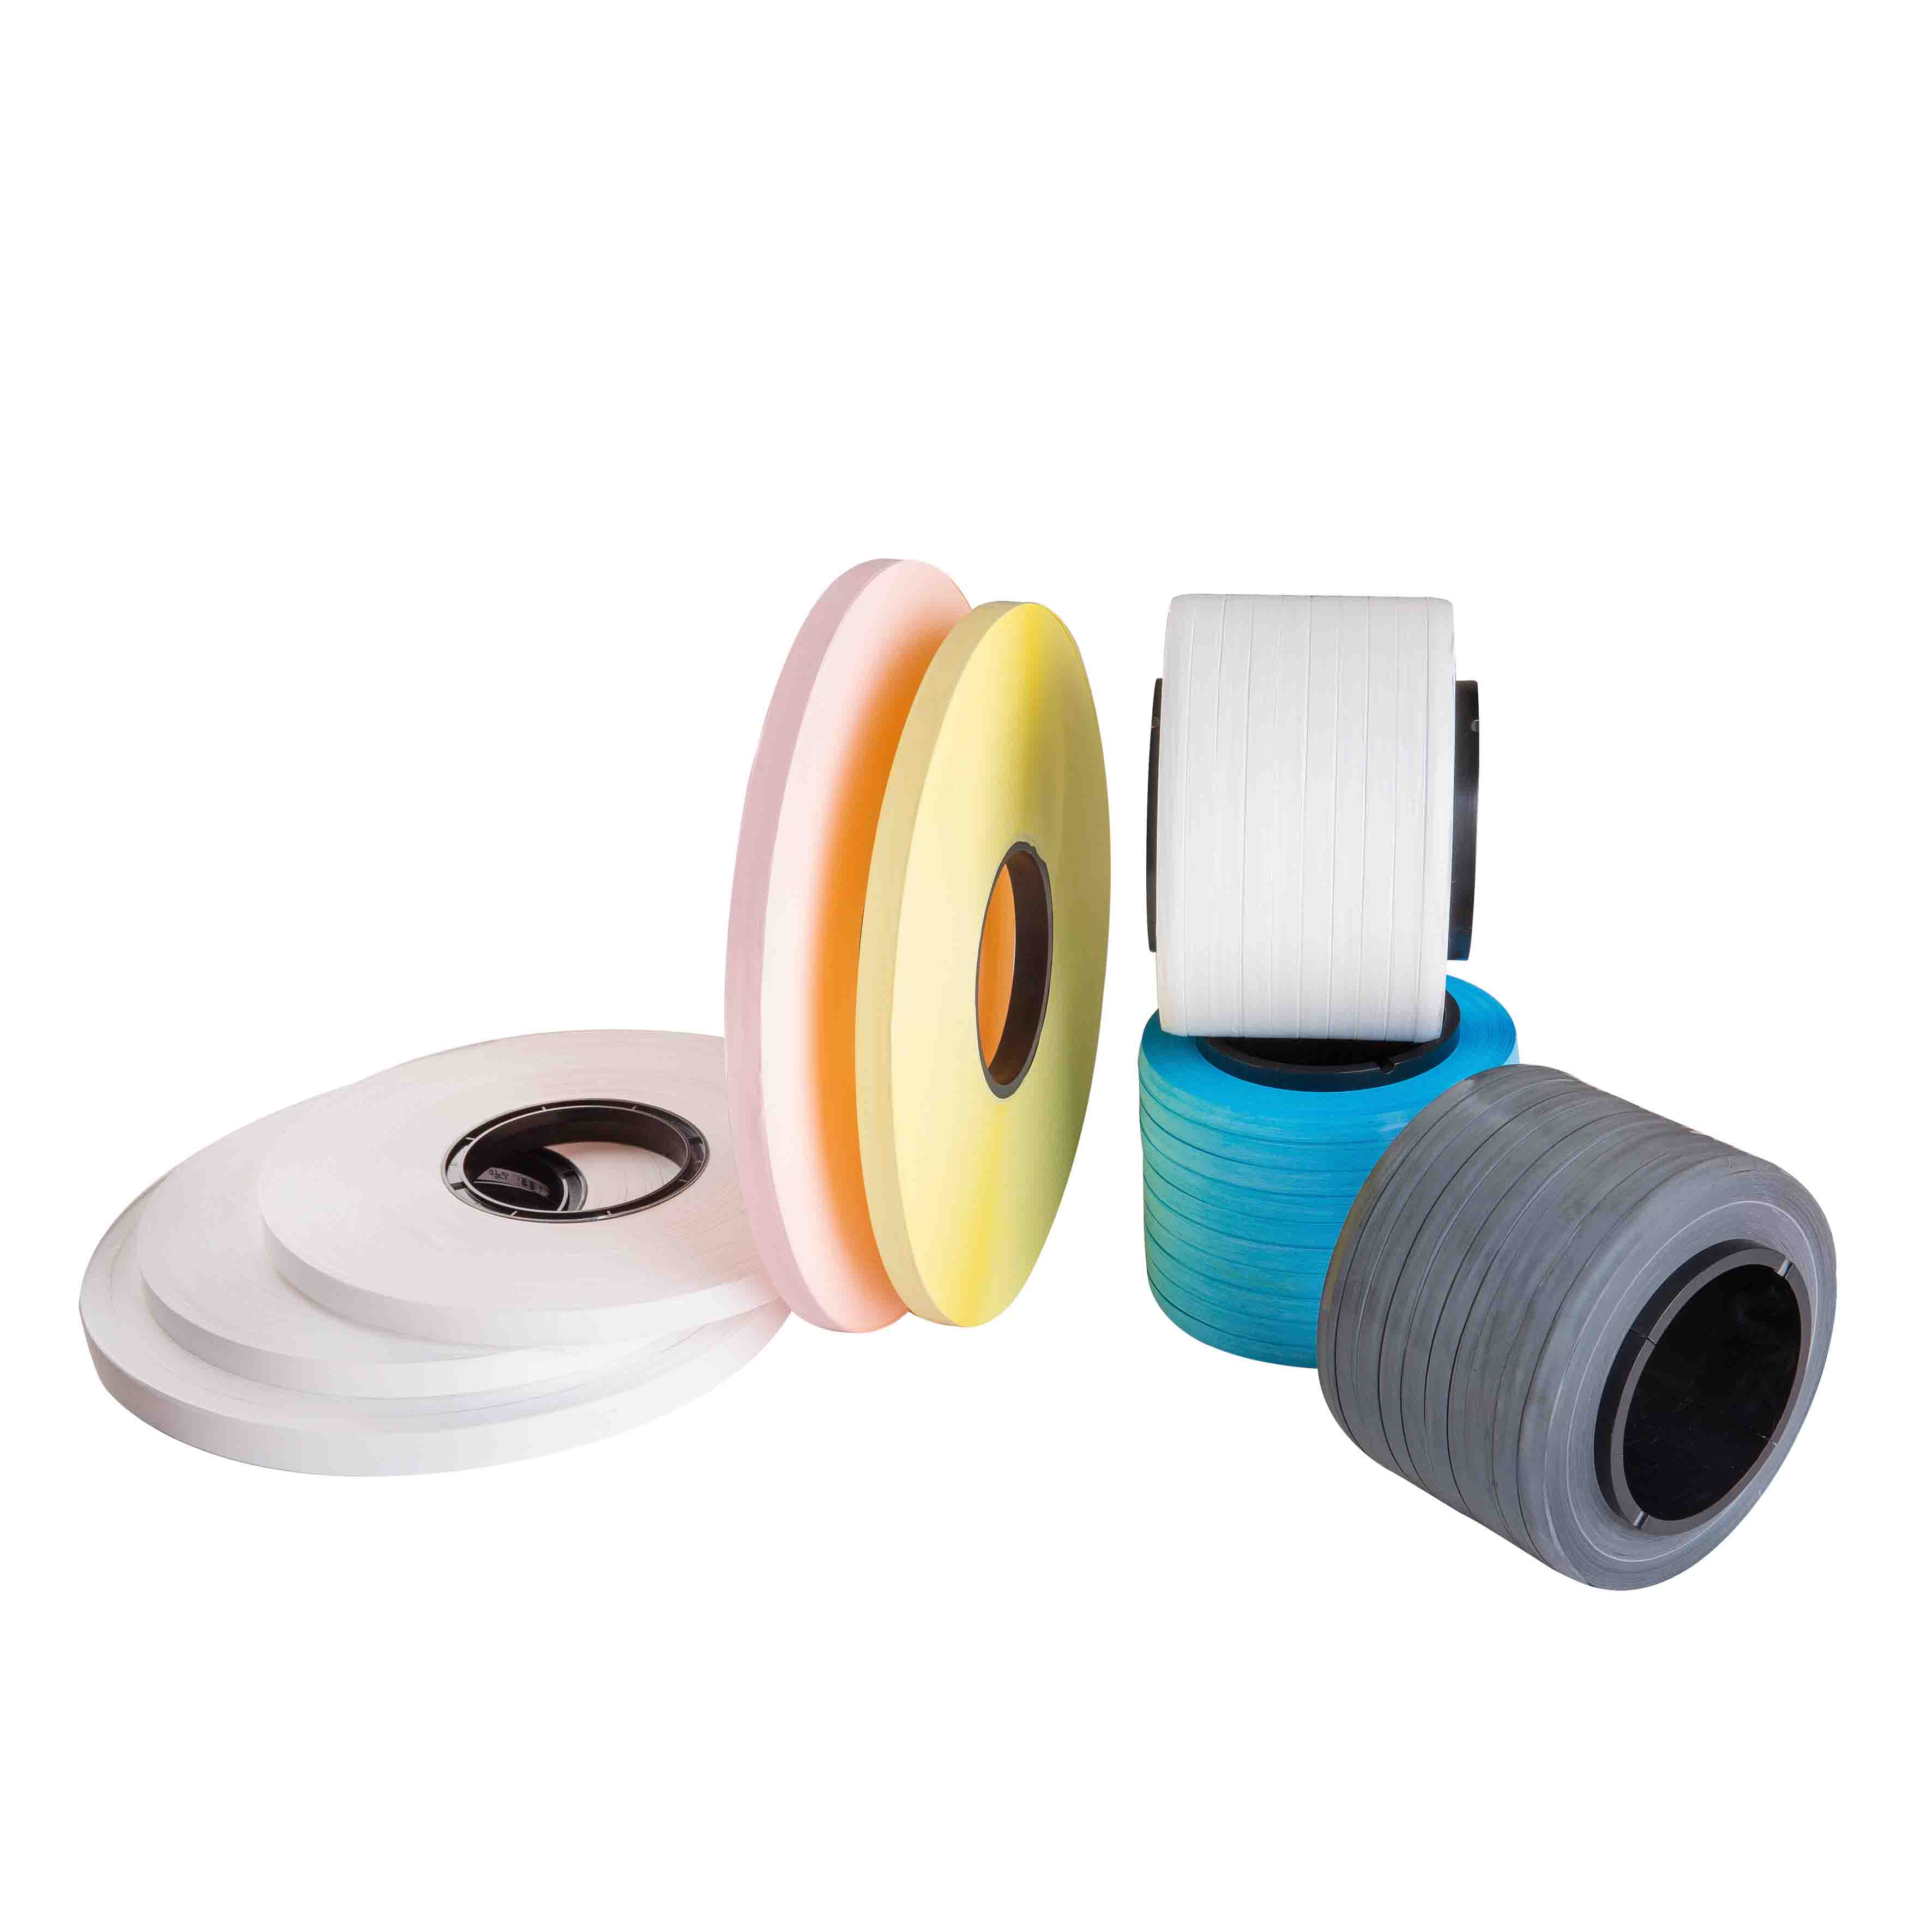 High Density Unsintered PTFE Tape for High Temperature Resistance Wires And Cables 